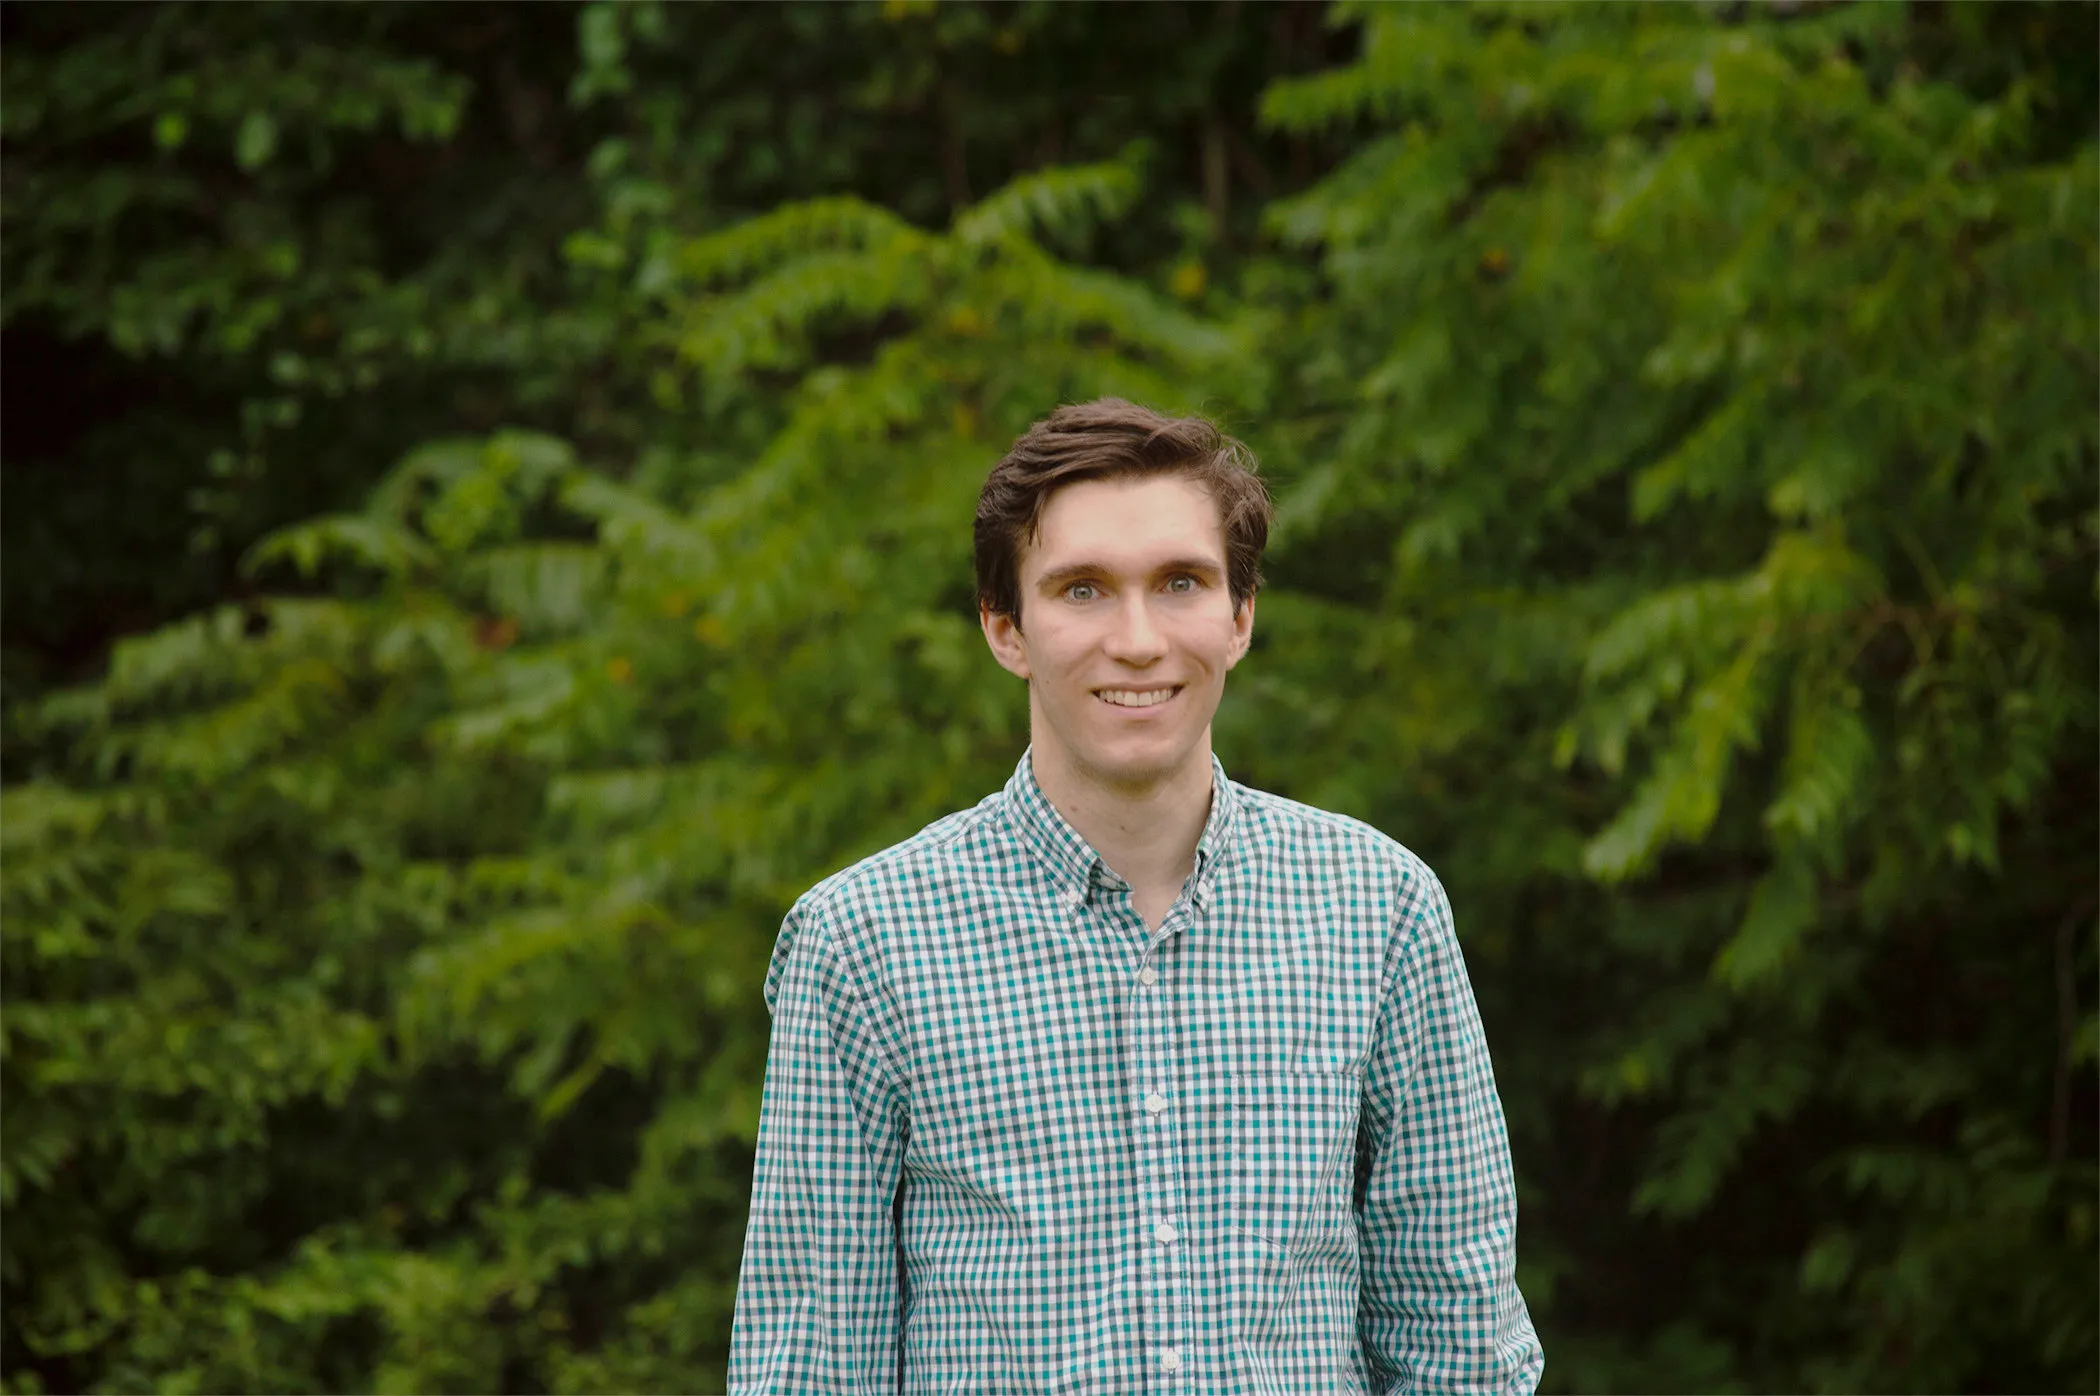 A photo portrait of Spencer Ainsworth, cropped to show his head and torso. He is smiling, has short, dark hair, and is wearing a light, watch-pattered, button-down shirt with an open collar. In the background, out-of-focus trees and shrubs are visible.